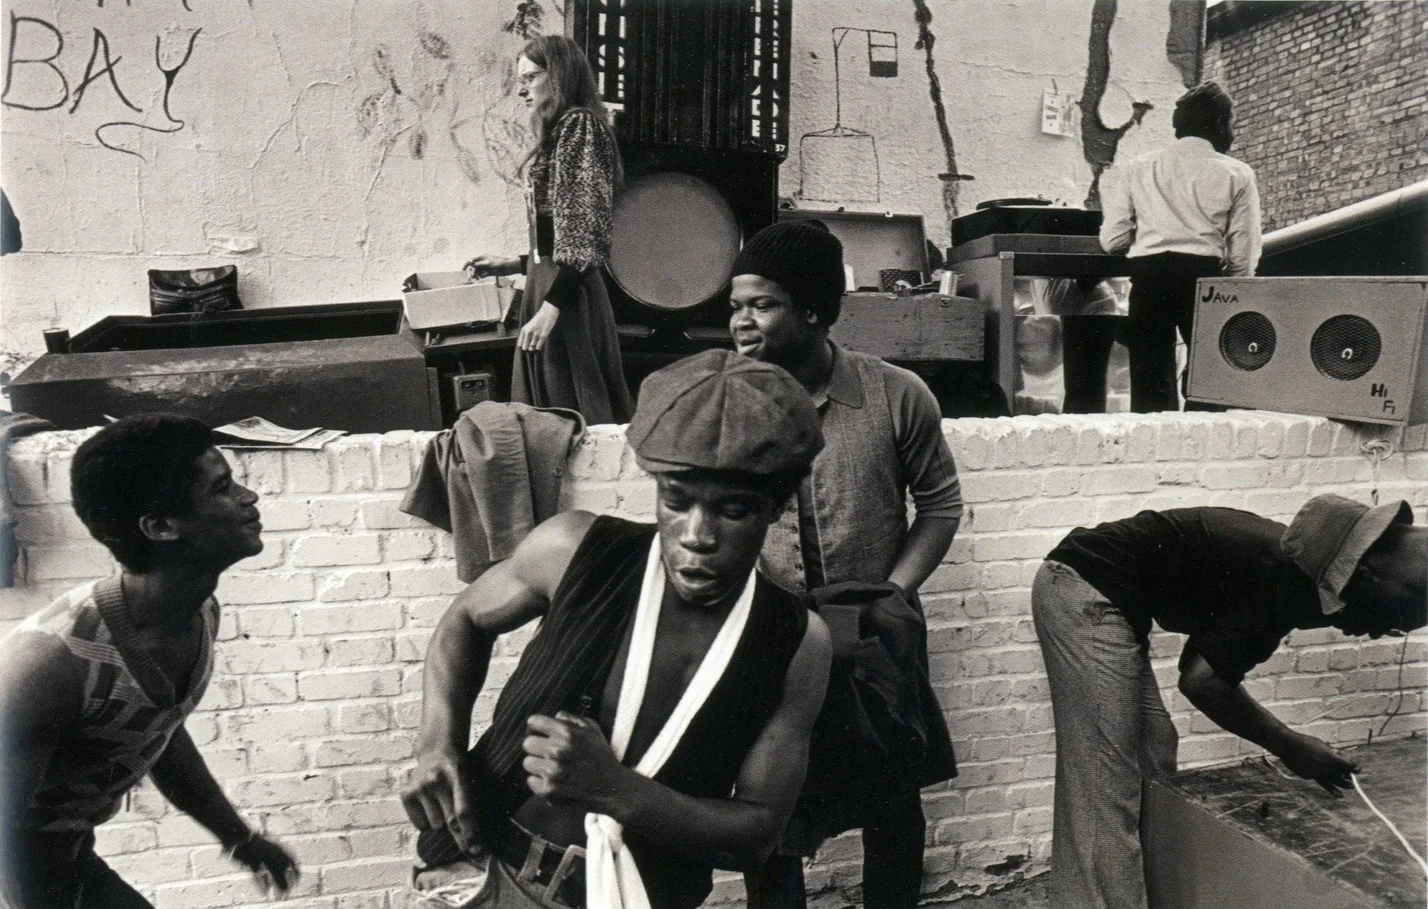 Philmore "Boots" Davidson, Chris Steele-Perkins from Notting Hill Carnival, 1975